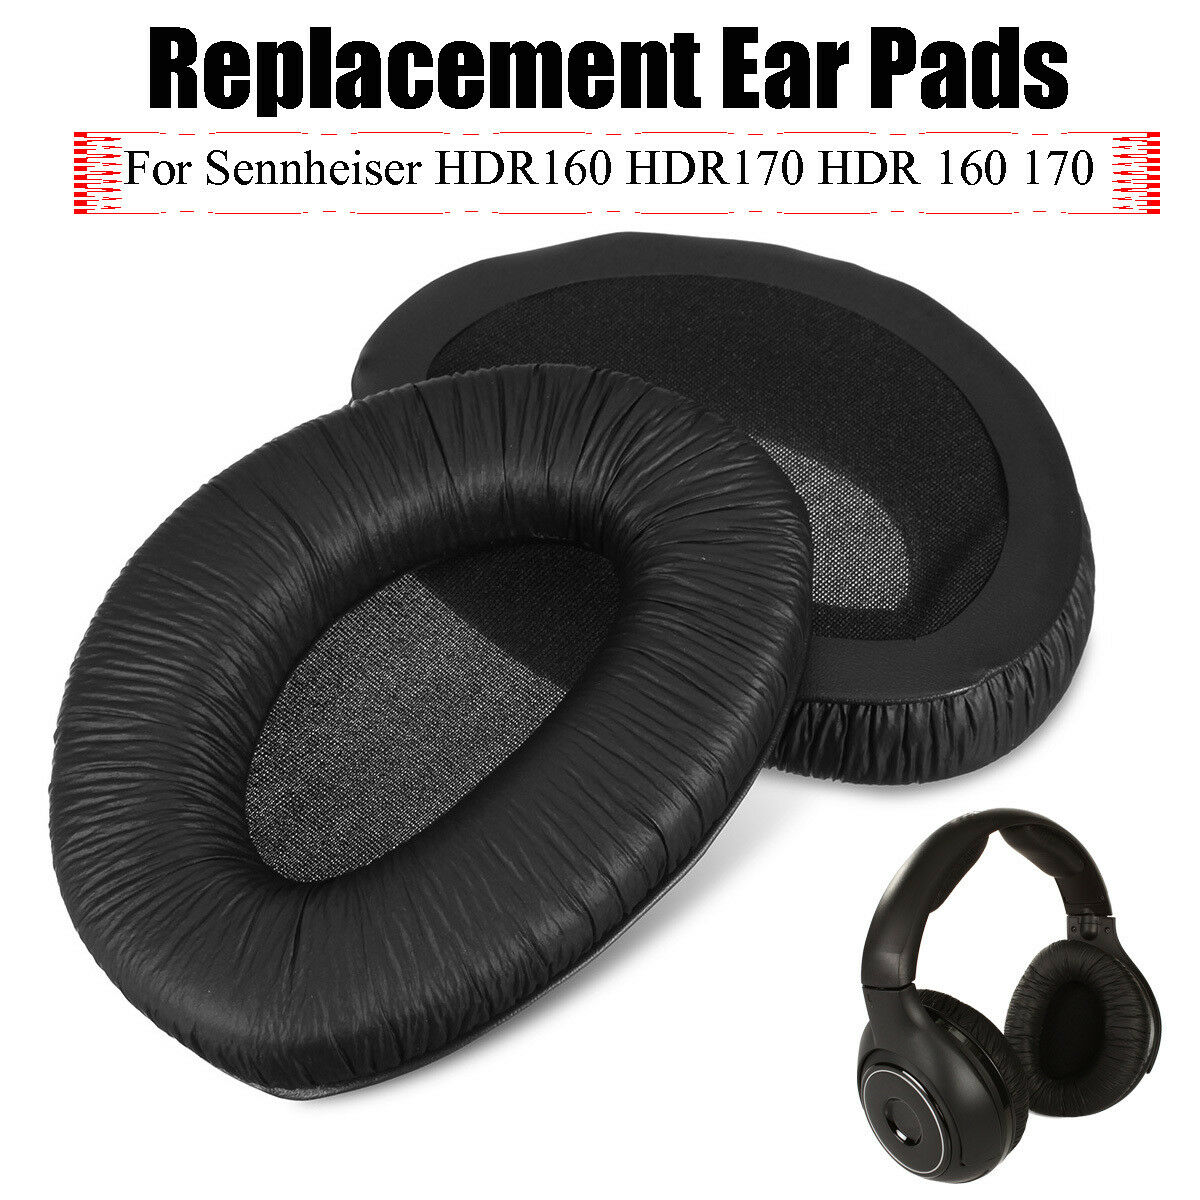 2pcs Ear Pad Cushion Covers Replacement For Sennheiser HDR160 HDR170